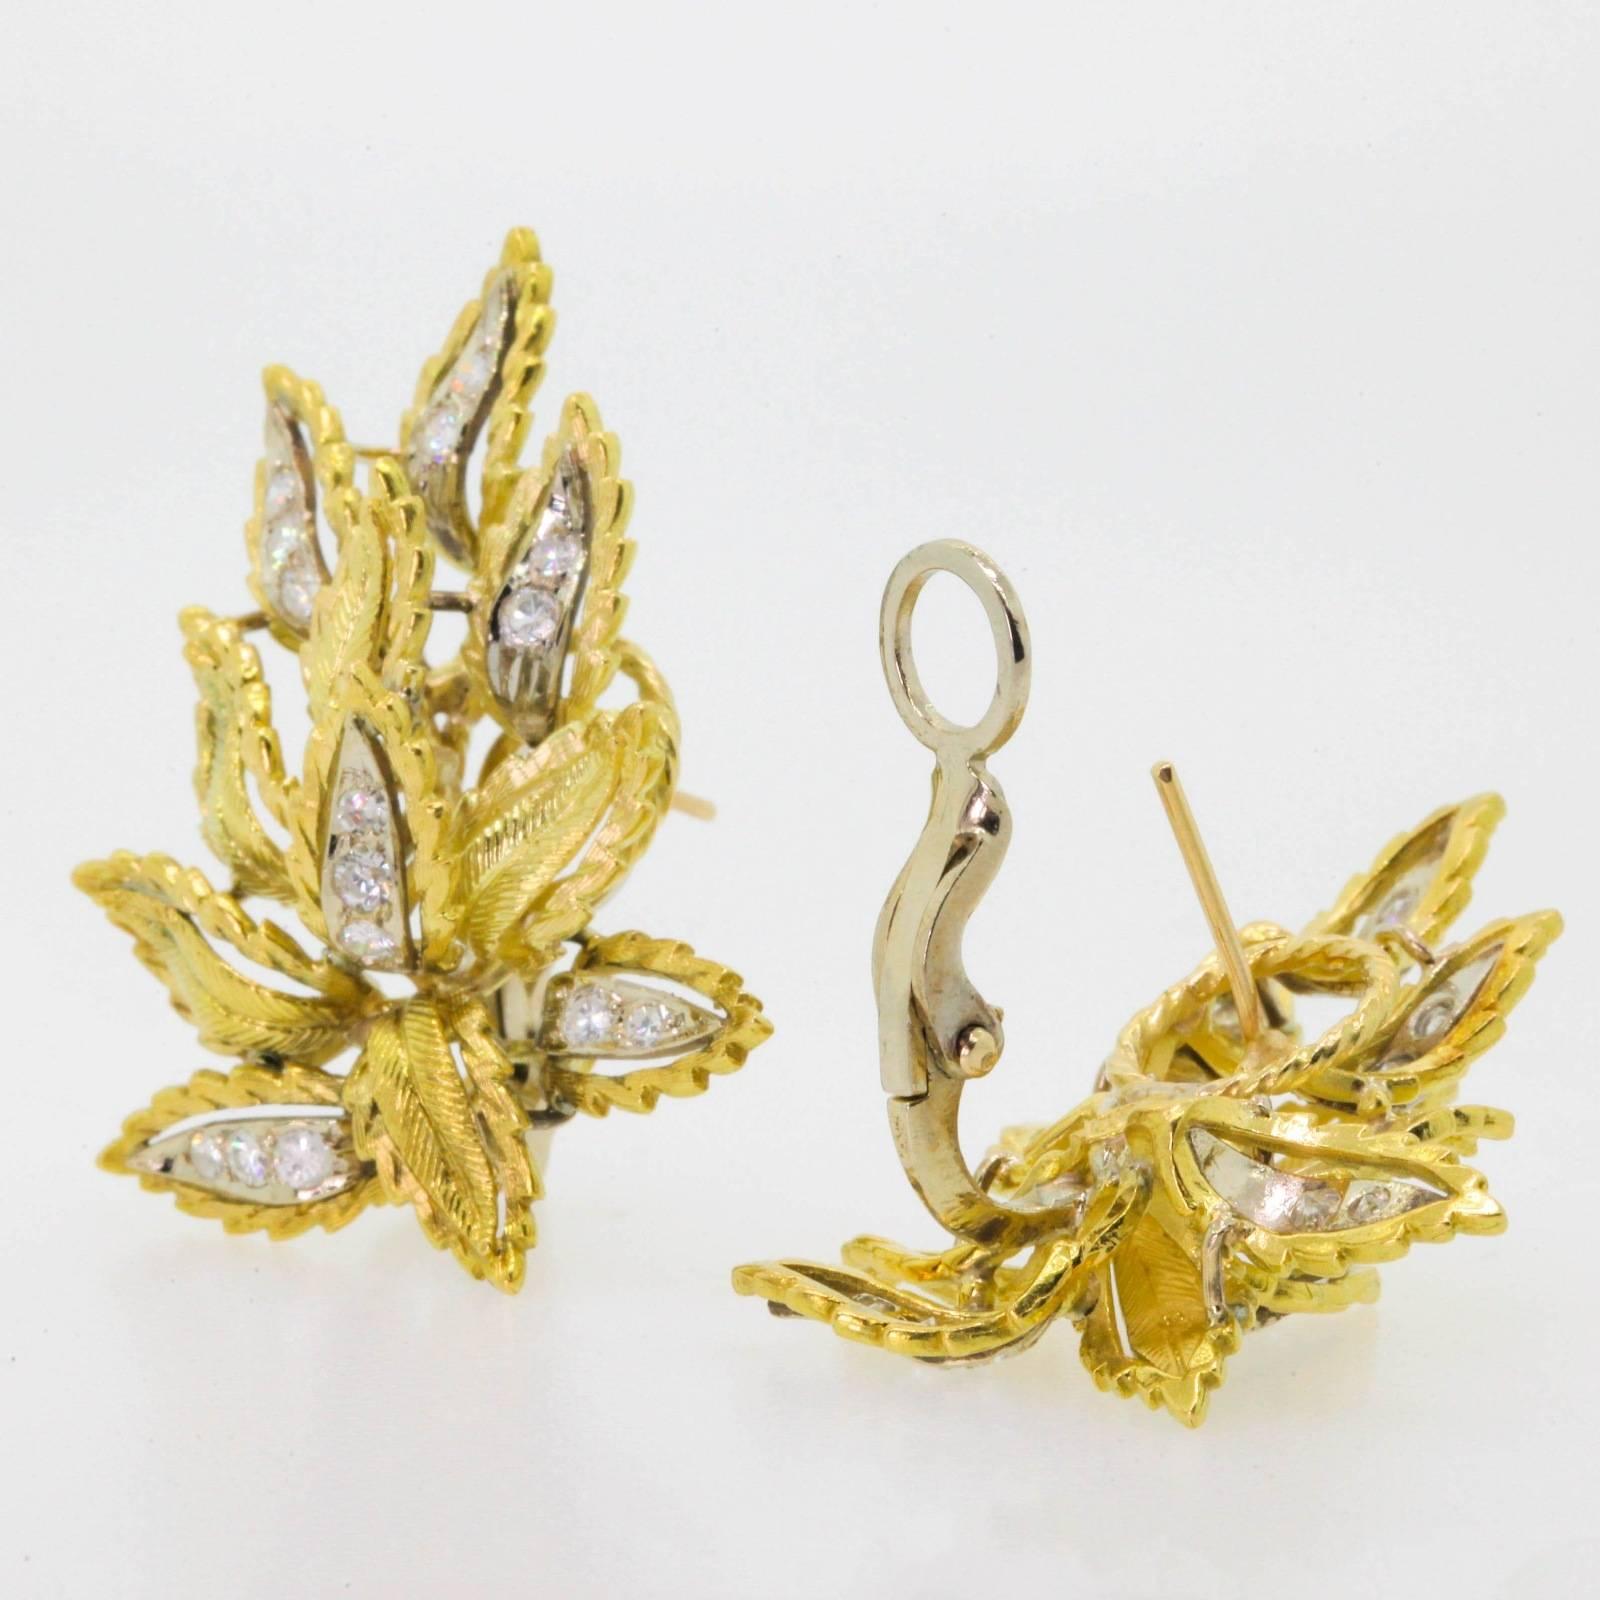 These stylish 18KT yellow gold earrings are designed as a fluid cluster of leaves accented with shimmery 1.00 carat of Round Brilliant Cut Diamonds set in 18KT white gold.  The earrings are set with straight post and omega backs.  Circa 1970s.  The